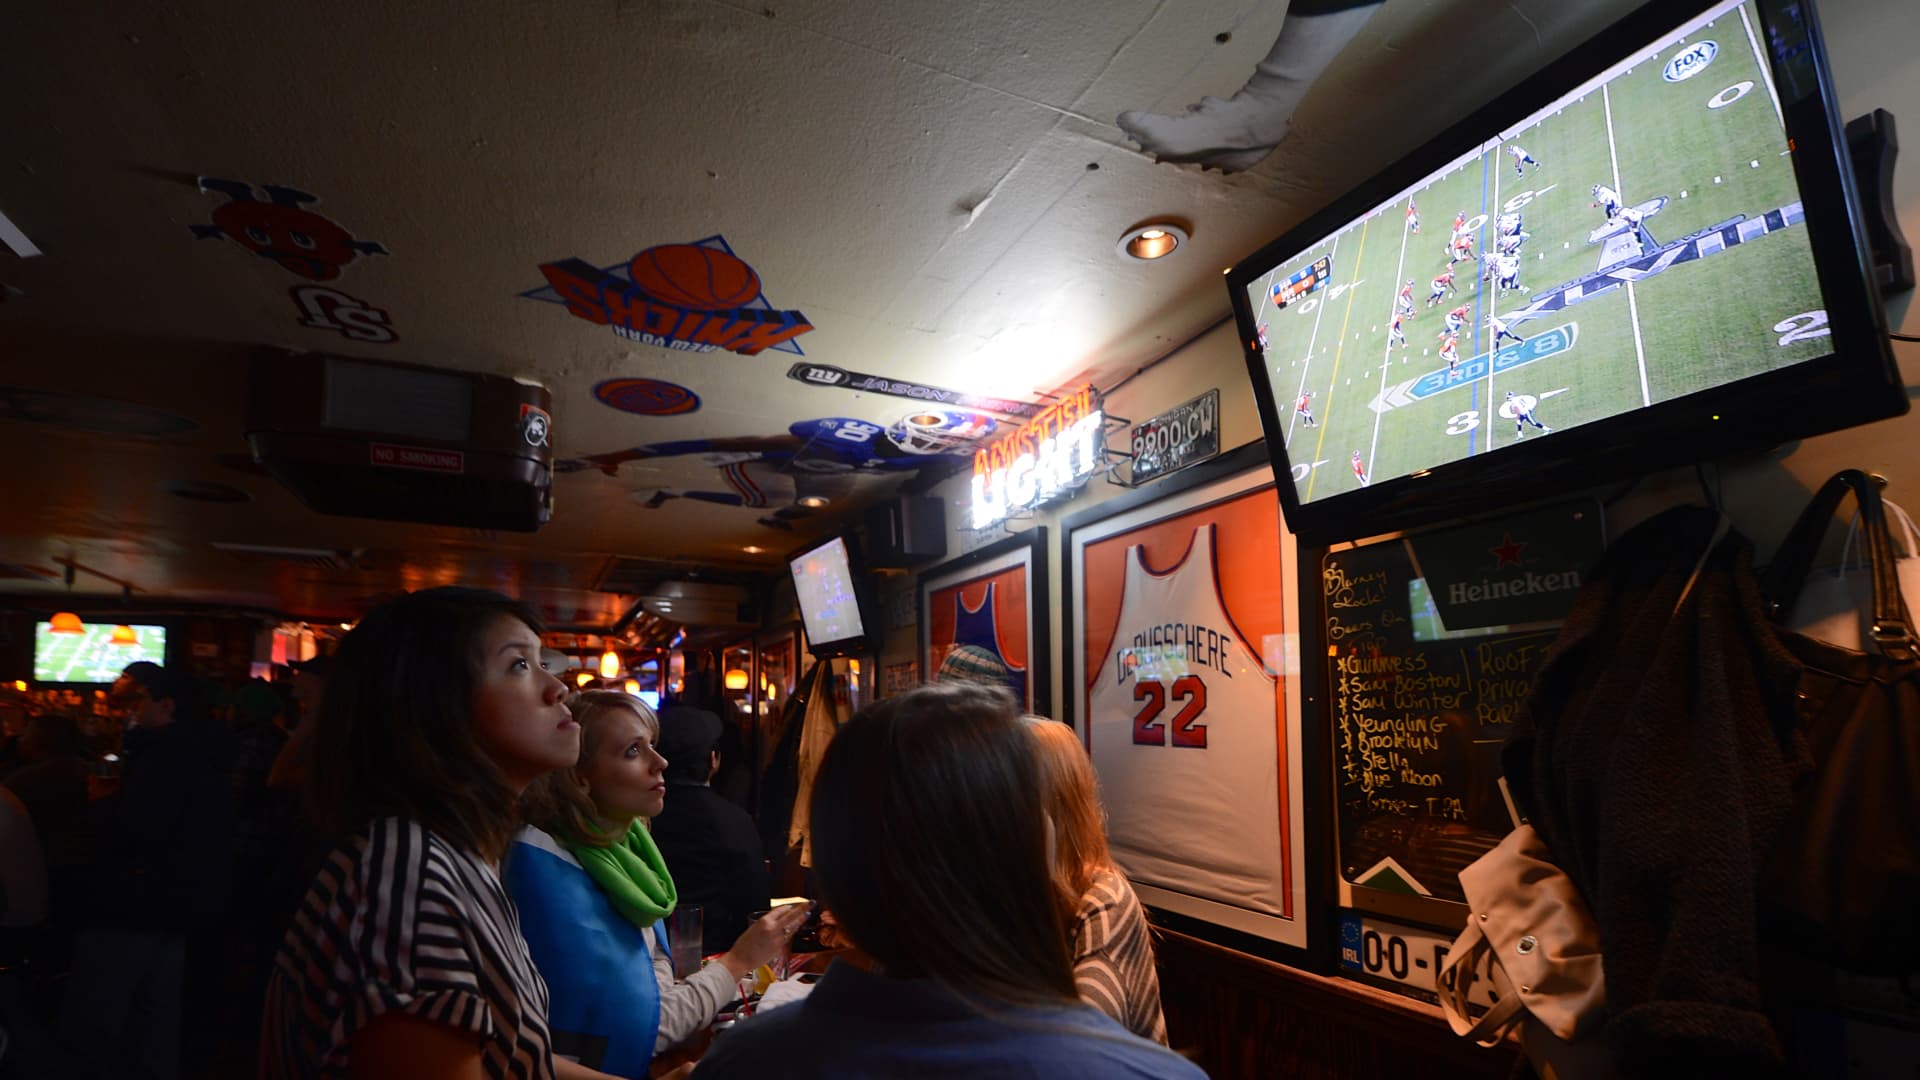 DirecTV reaches deal to provide NFL ‘Sunday Ticket’ to bars and restaurants